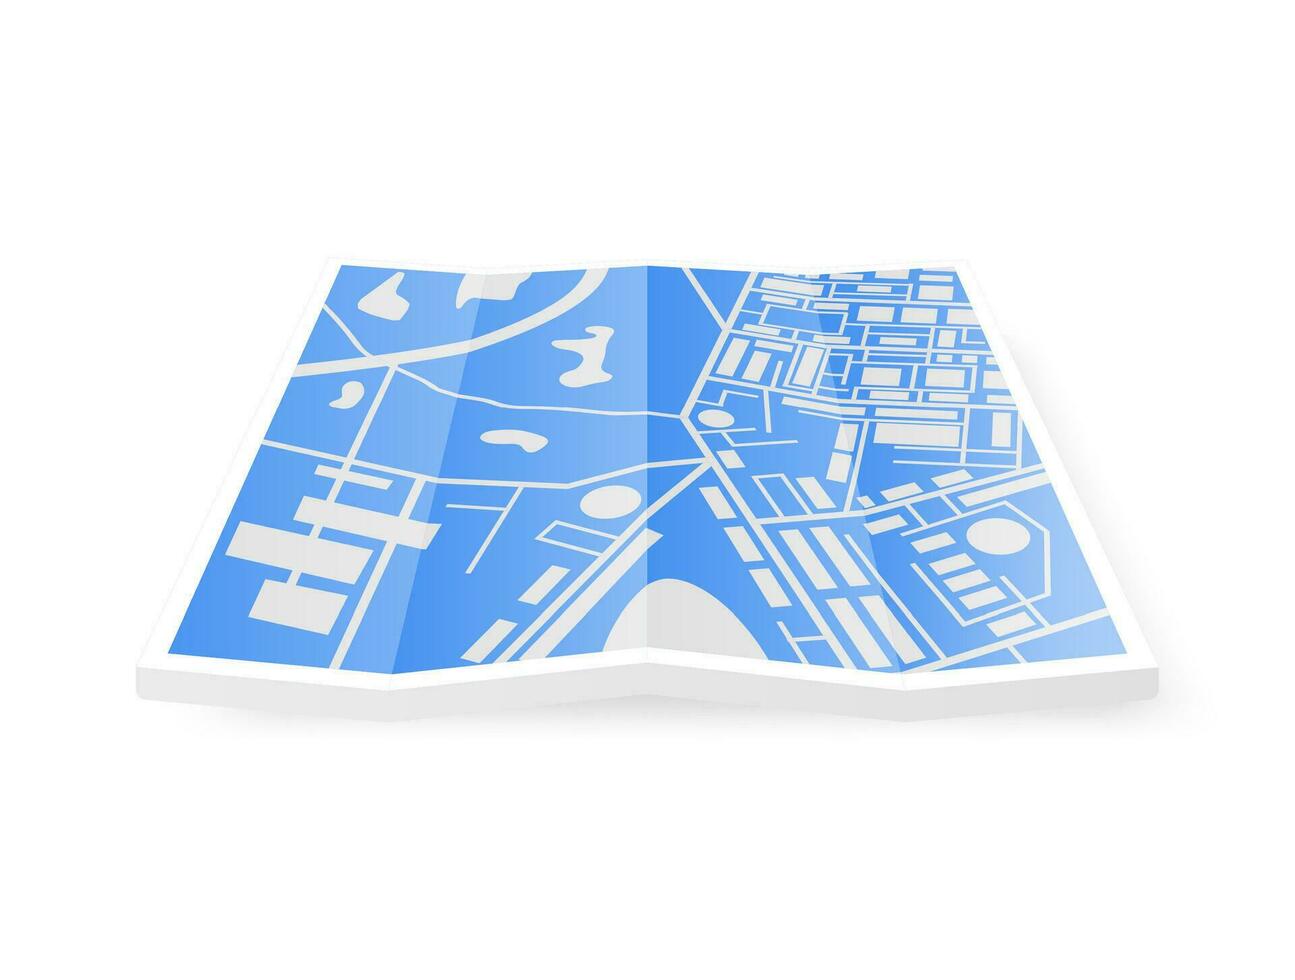 3D Folded Paper City Suburban Map Isolated on White. Abstract Generic Map with Roads, Buildings, Parks, River, Lake. GPS and Navigation. Points of Interest. Vector Illustration